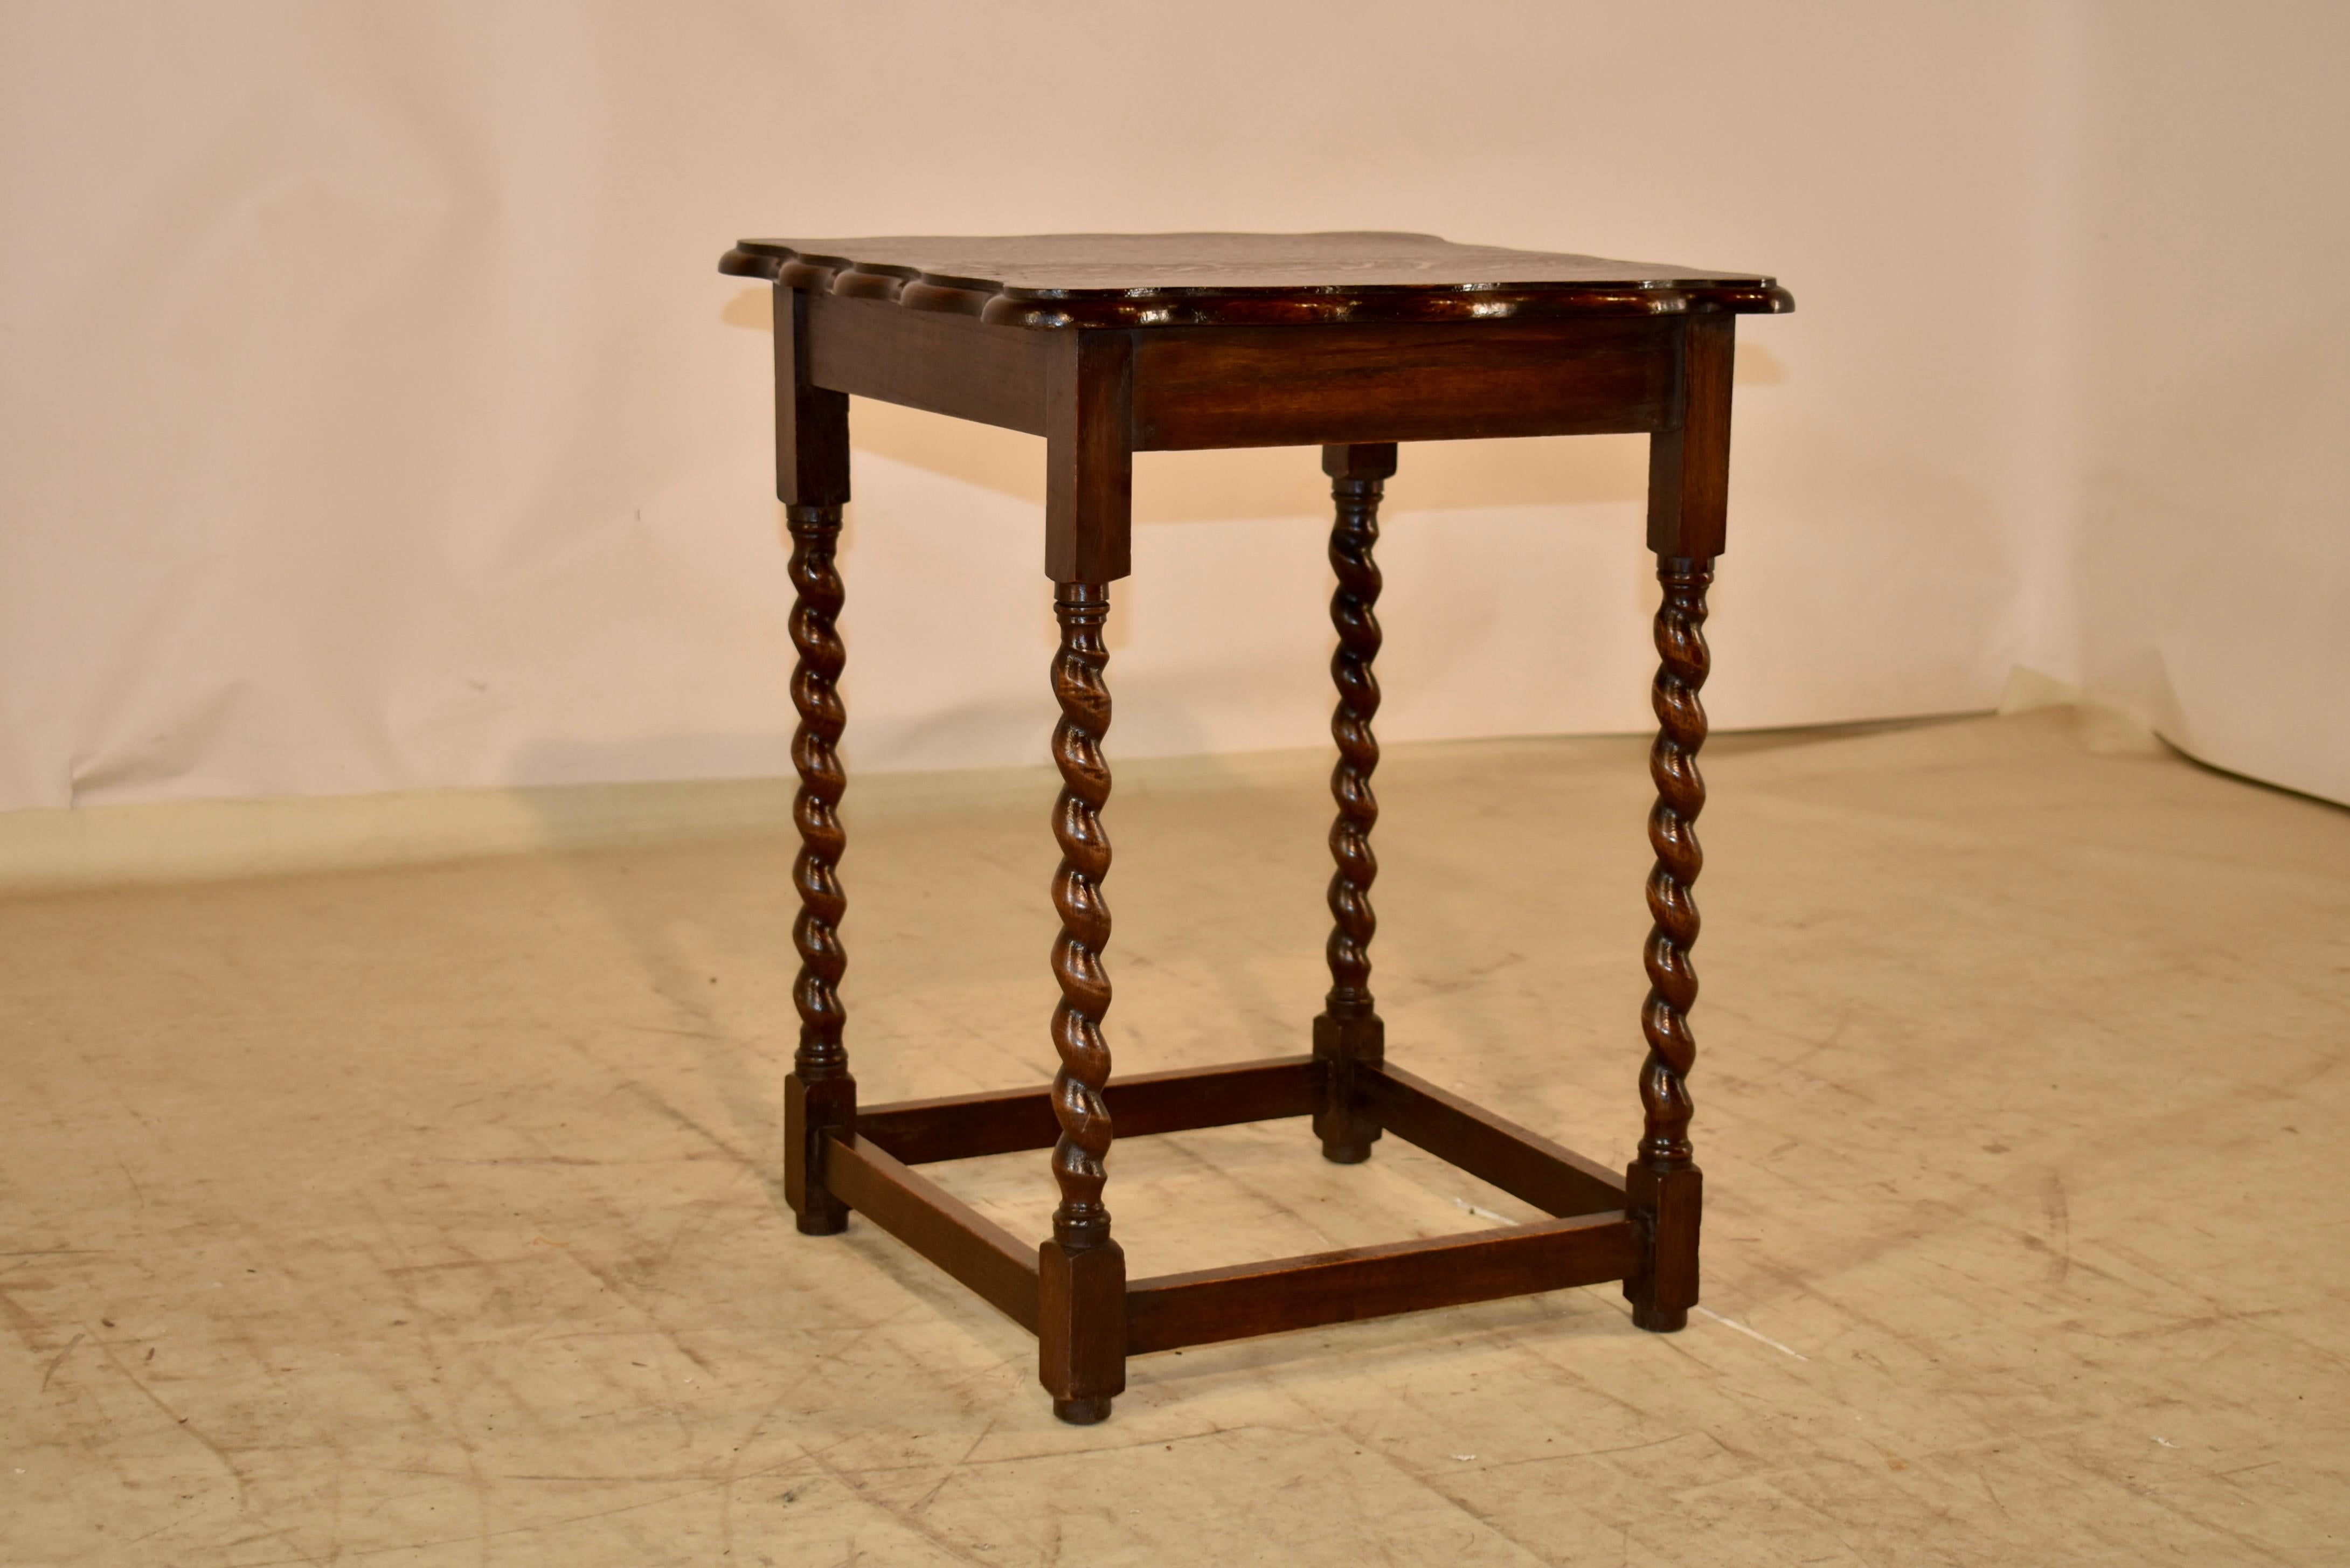 Period Edwardian oak side table from England.  The top has a hand scalloped and beveled edge, following down to a simple apron.  The table is supported on hand turned barley twist legs, joined by simple stretchers and raised on turned feet.